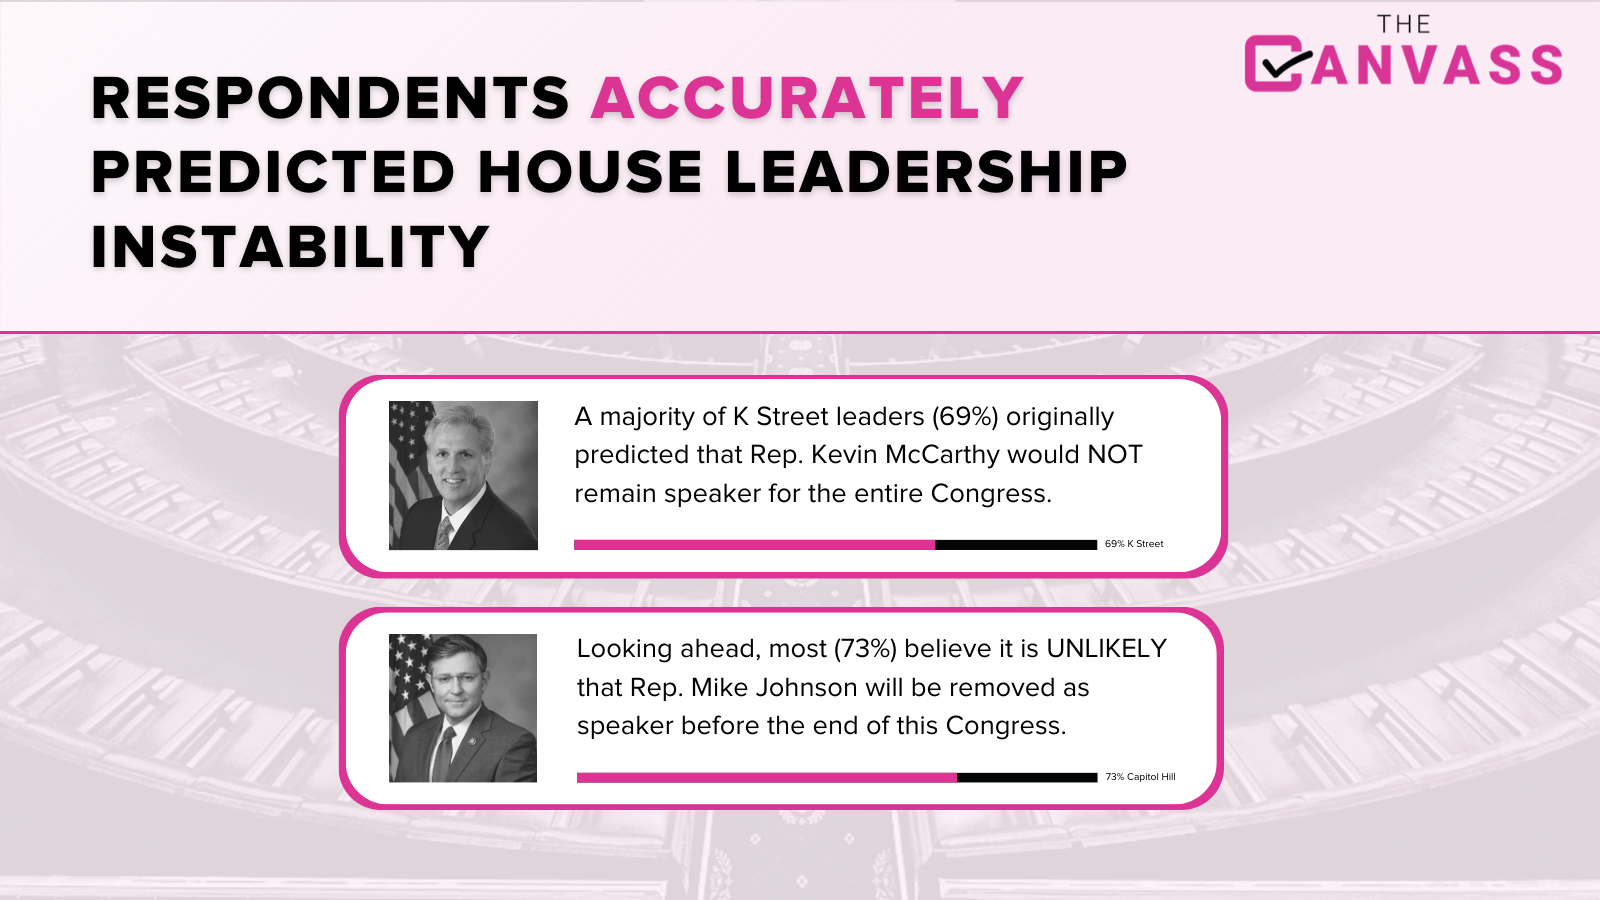 Canvass respondents accurately predicted House leadership instability